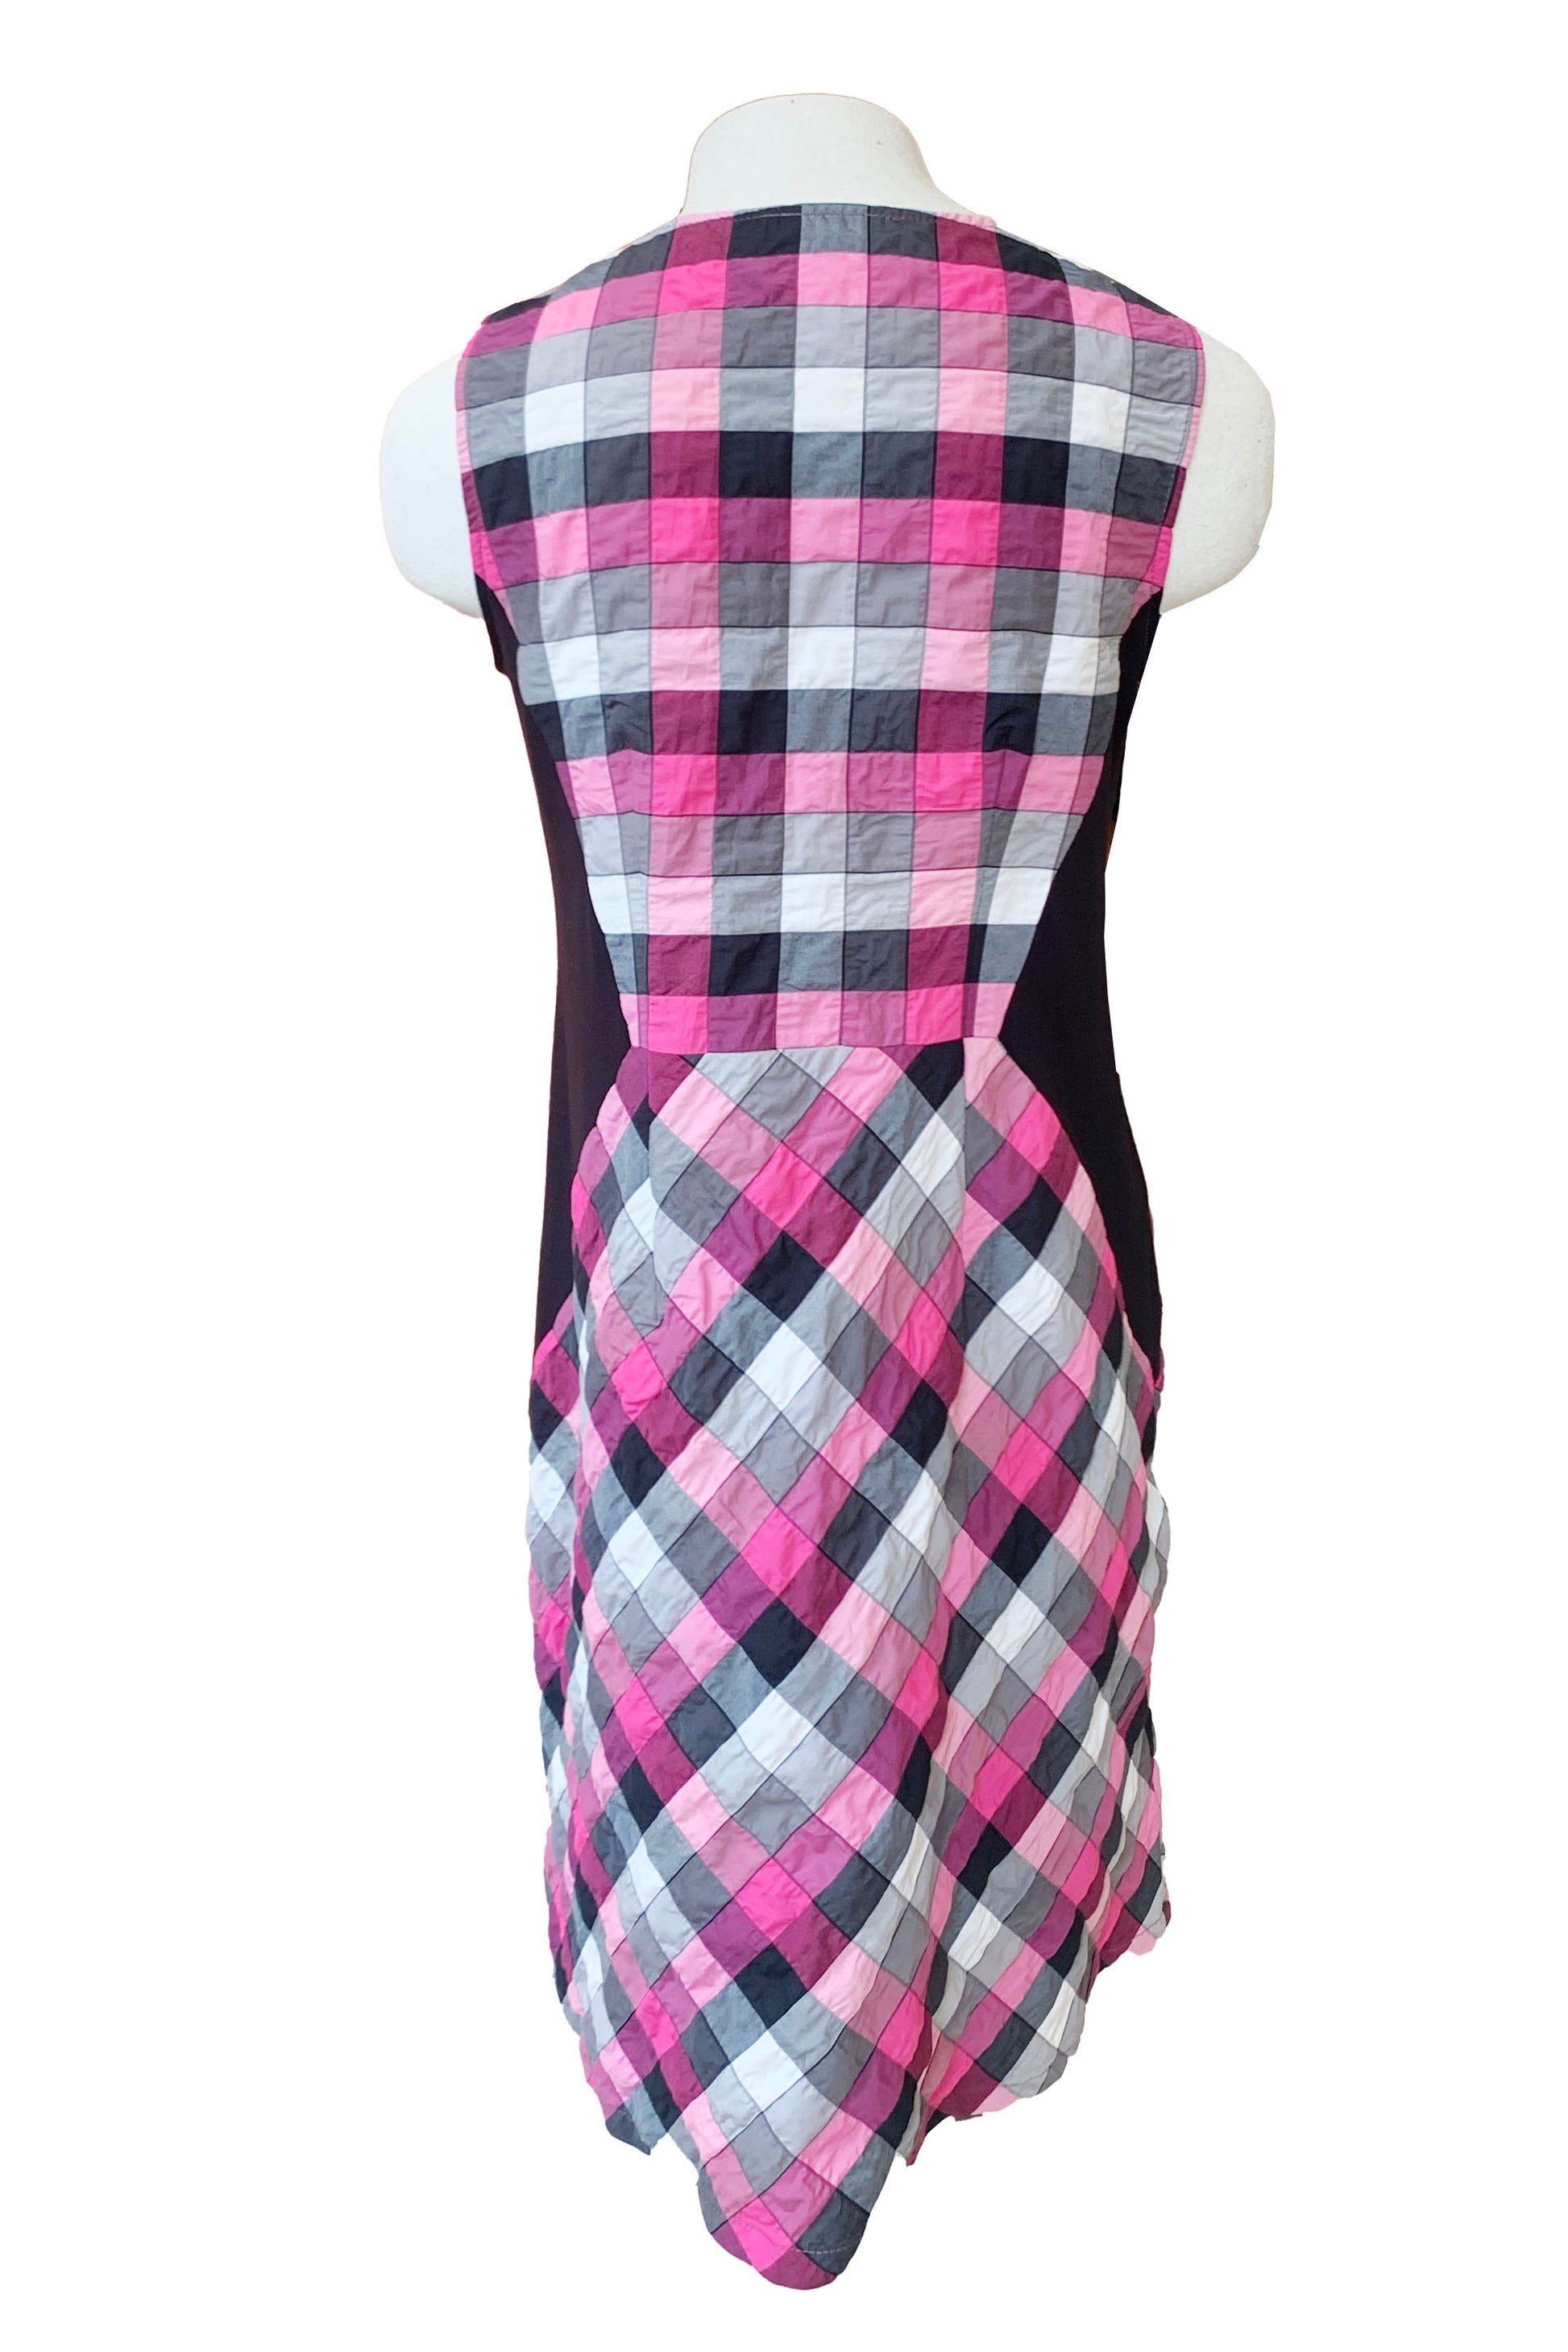 Amanda Dress by Solomia, Pink/White/Black, back view, plaid, sleeveless, round neck, contrasting black panels at the sides, above the knee, sizes XS to L, made in Carleton Place